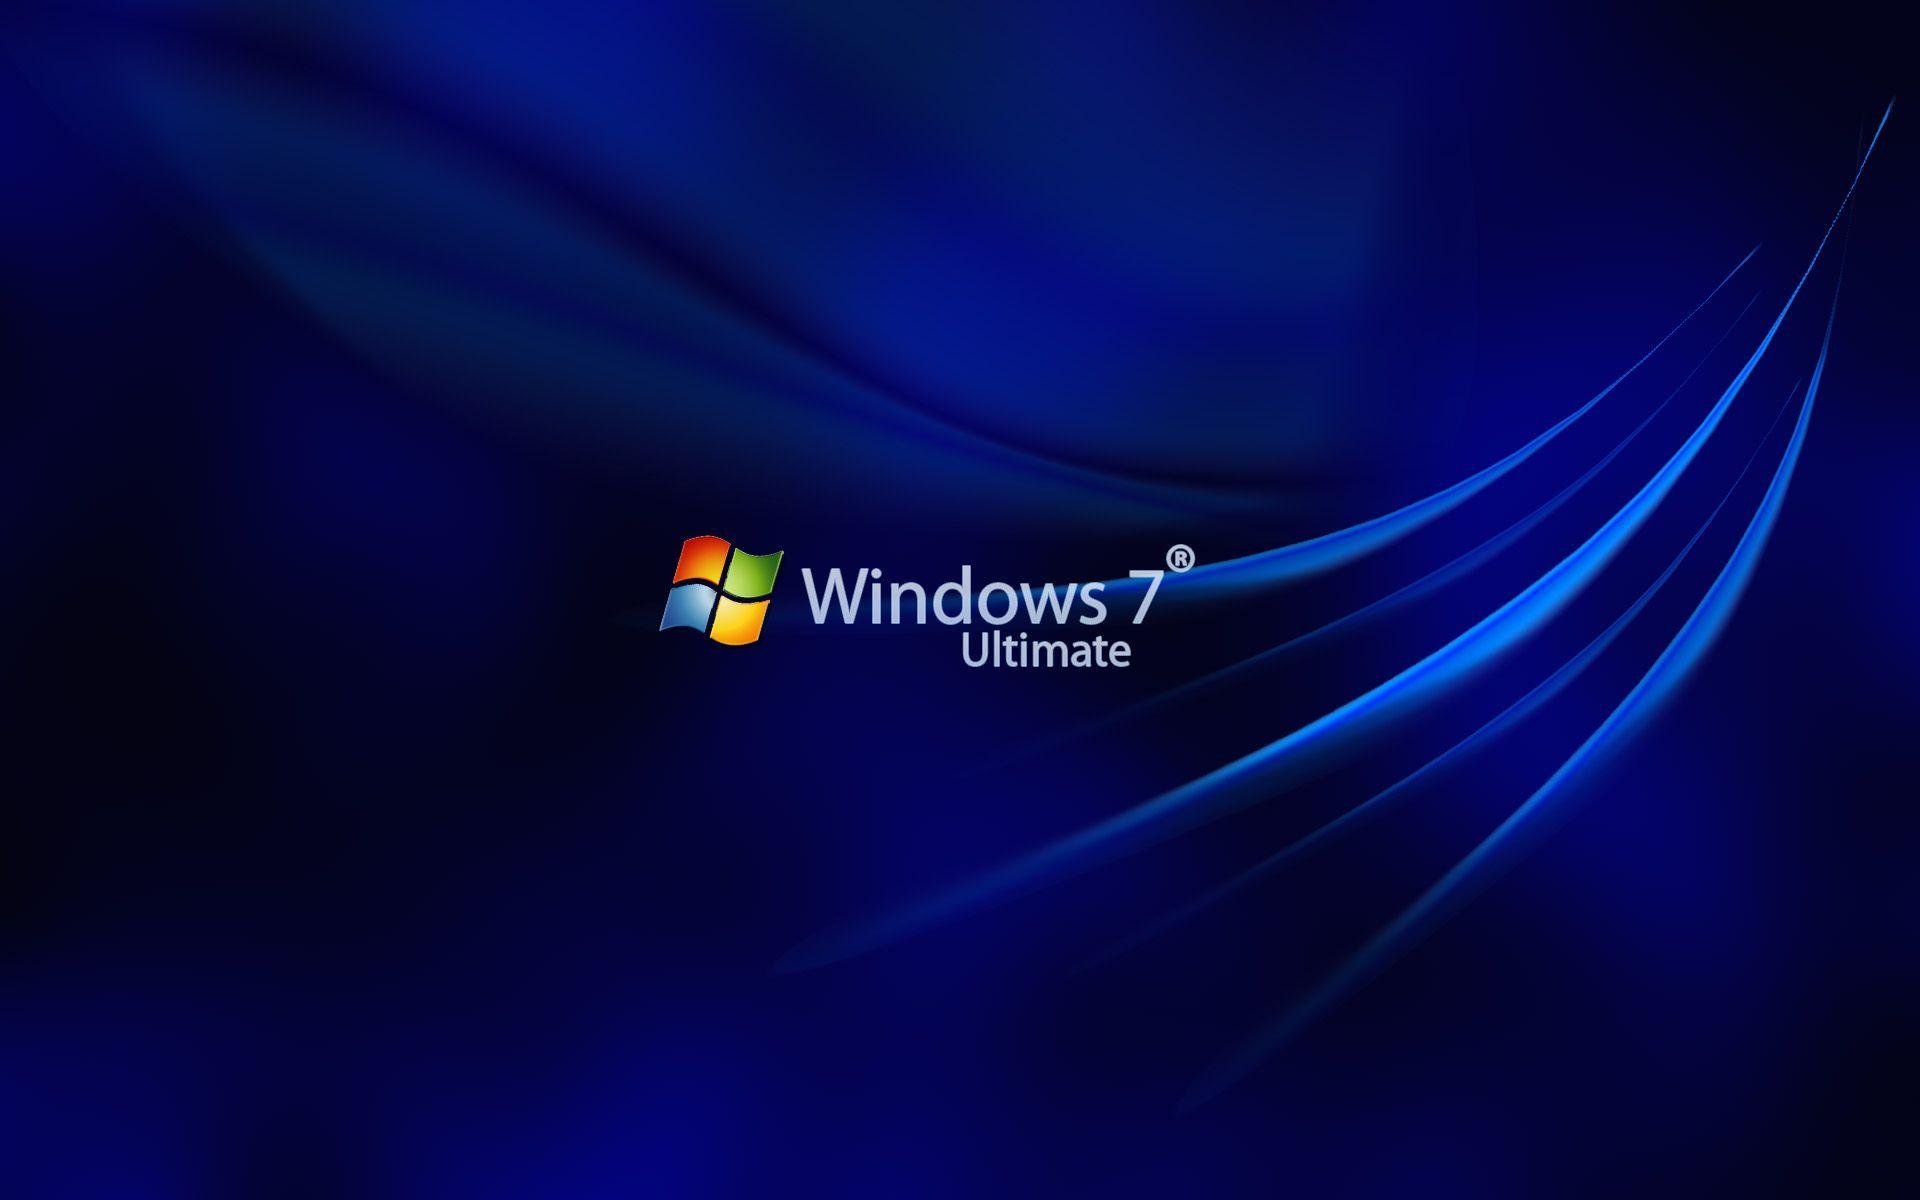 Free Download Windows Ultimate HD Wallpaper Full Size 1024x768PX